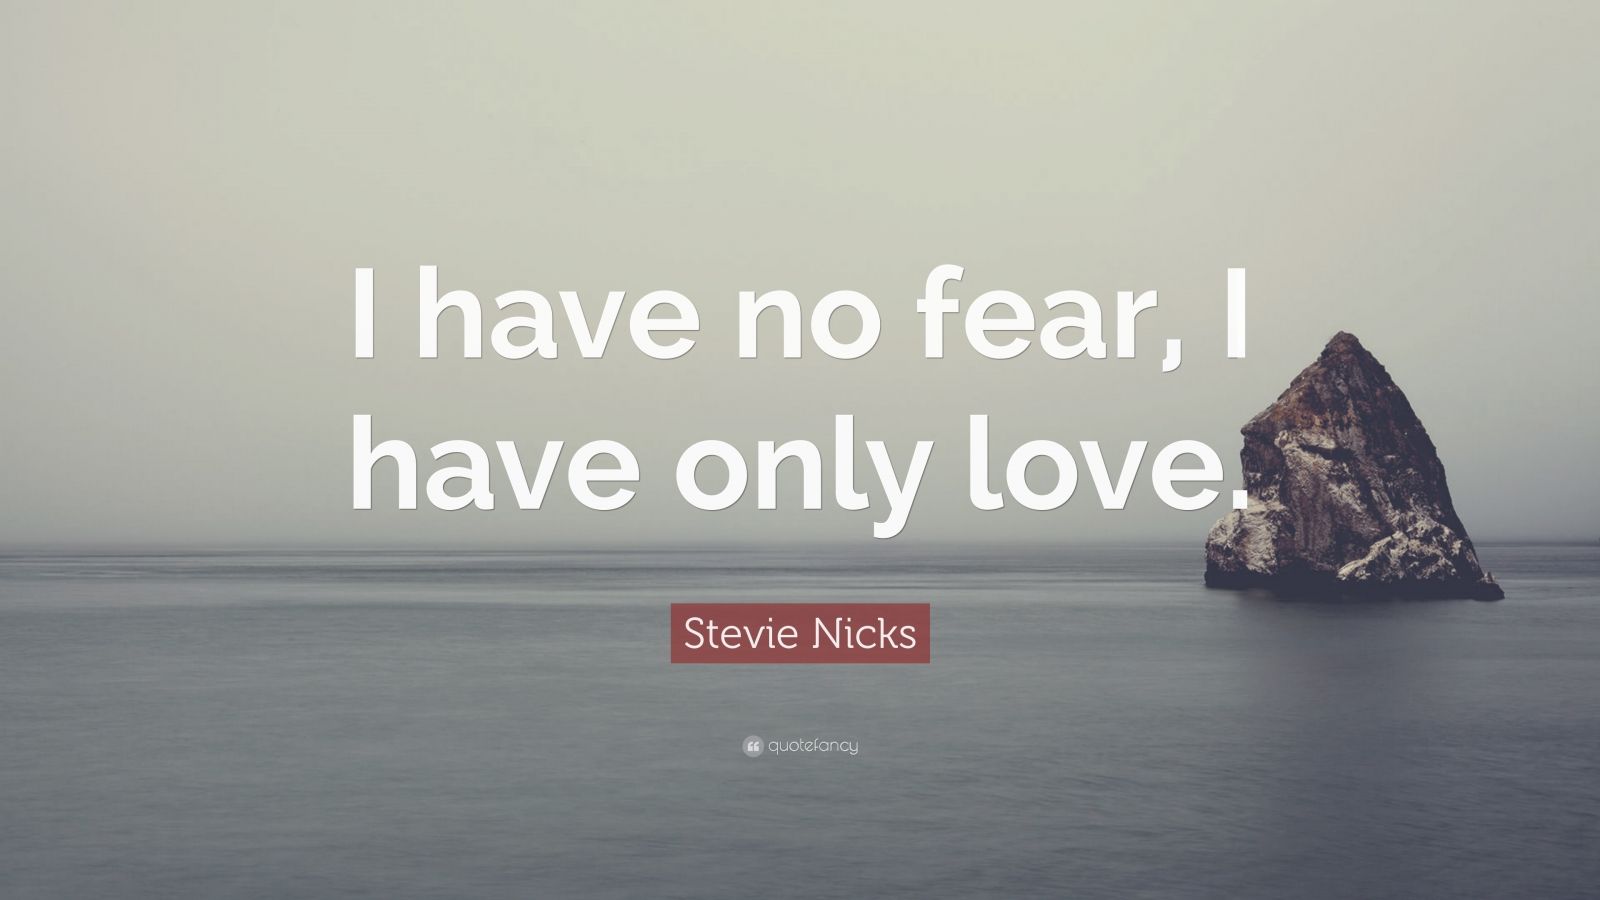 Stevie Nicks Quote “I have no fear, I have only love.” (9